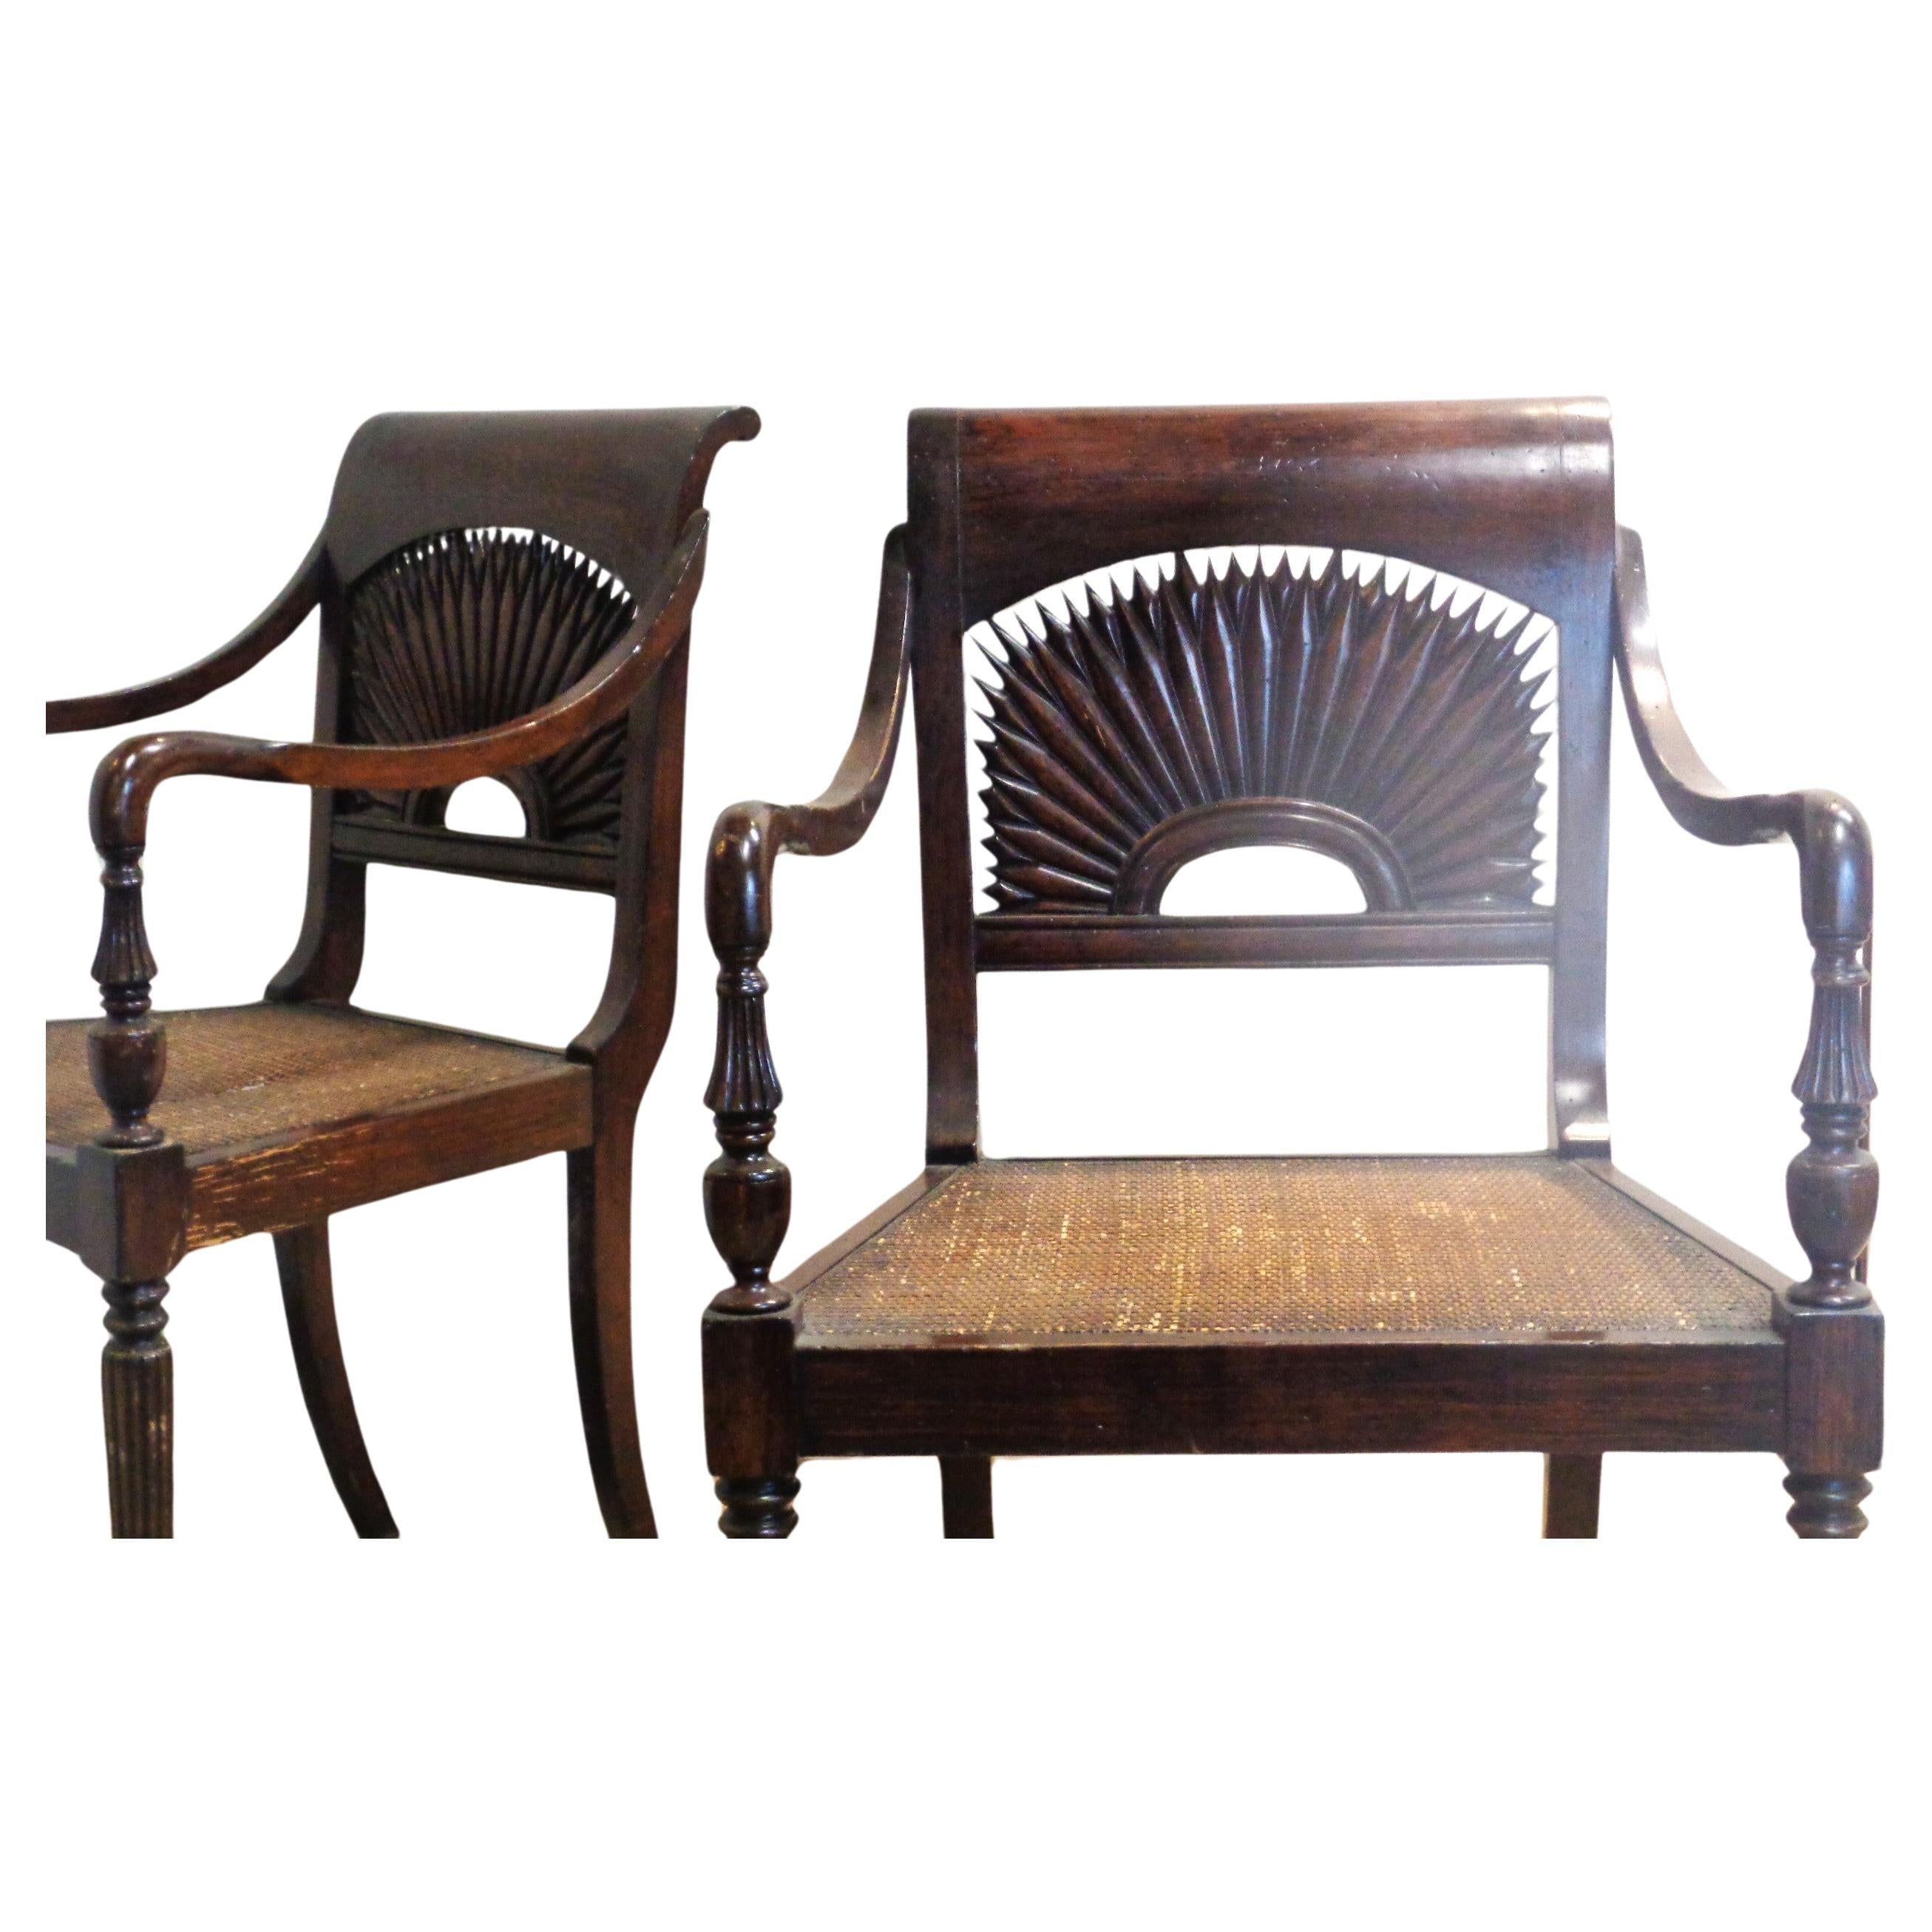 A pair of Anglo Indian style armchairs in a faux grained rosewood like finish w/ beautifully detailed carved sunburst backs / finely reeded legs / swooping curved arms / original tightly woven press cane seats / overall nicely aged rich surface